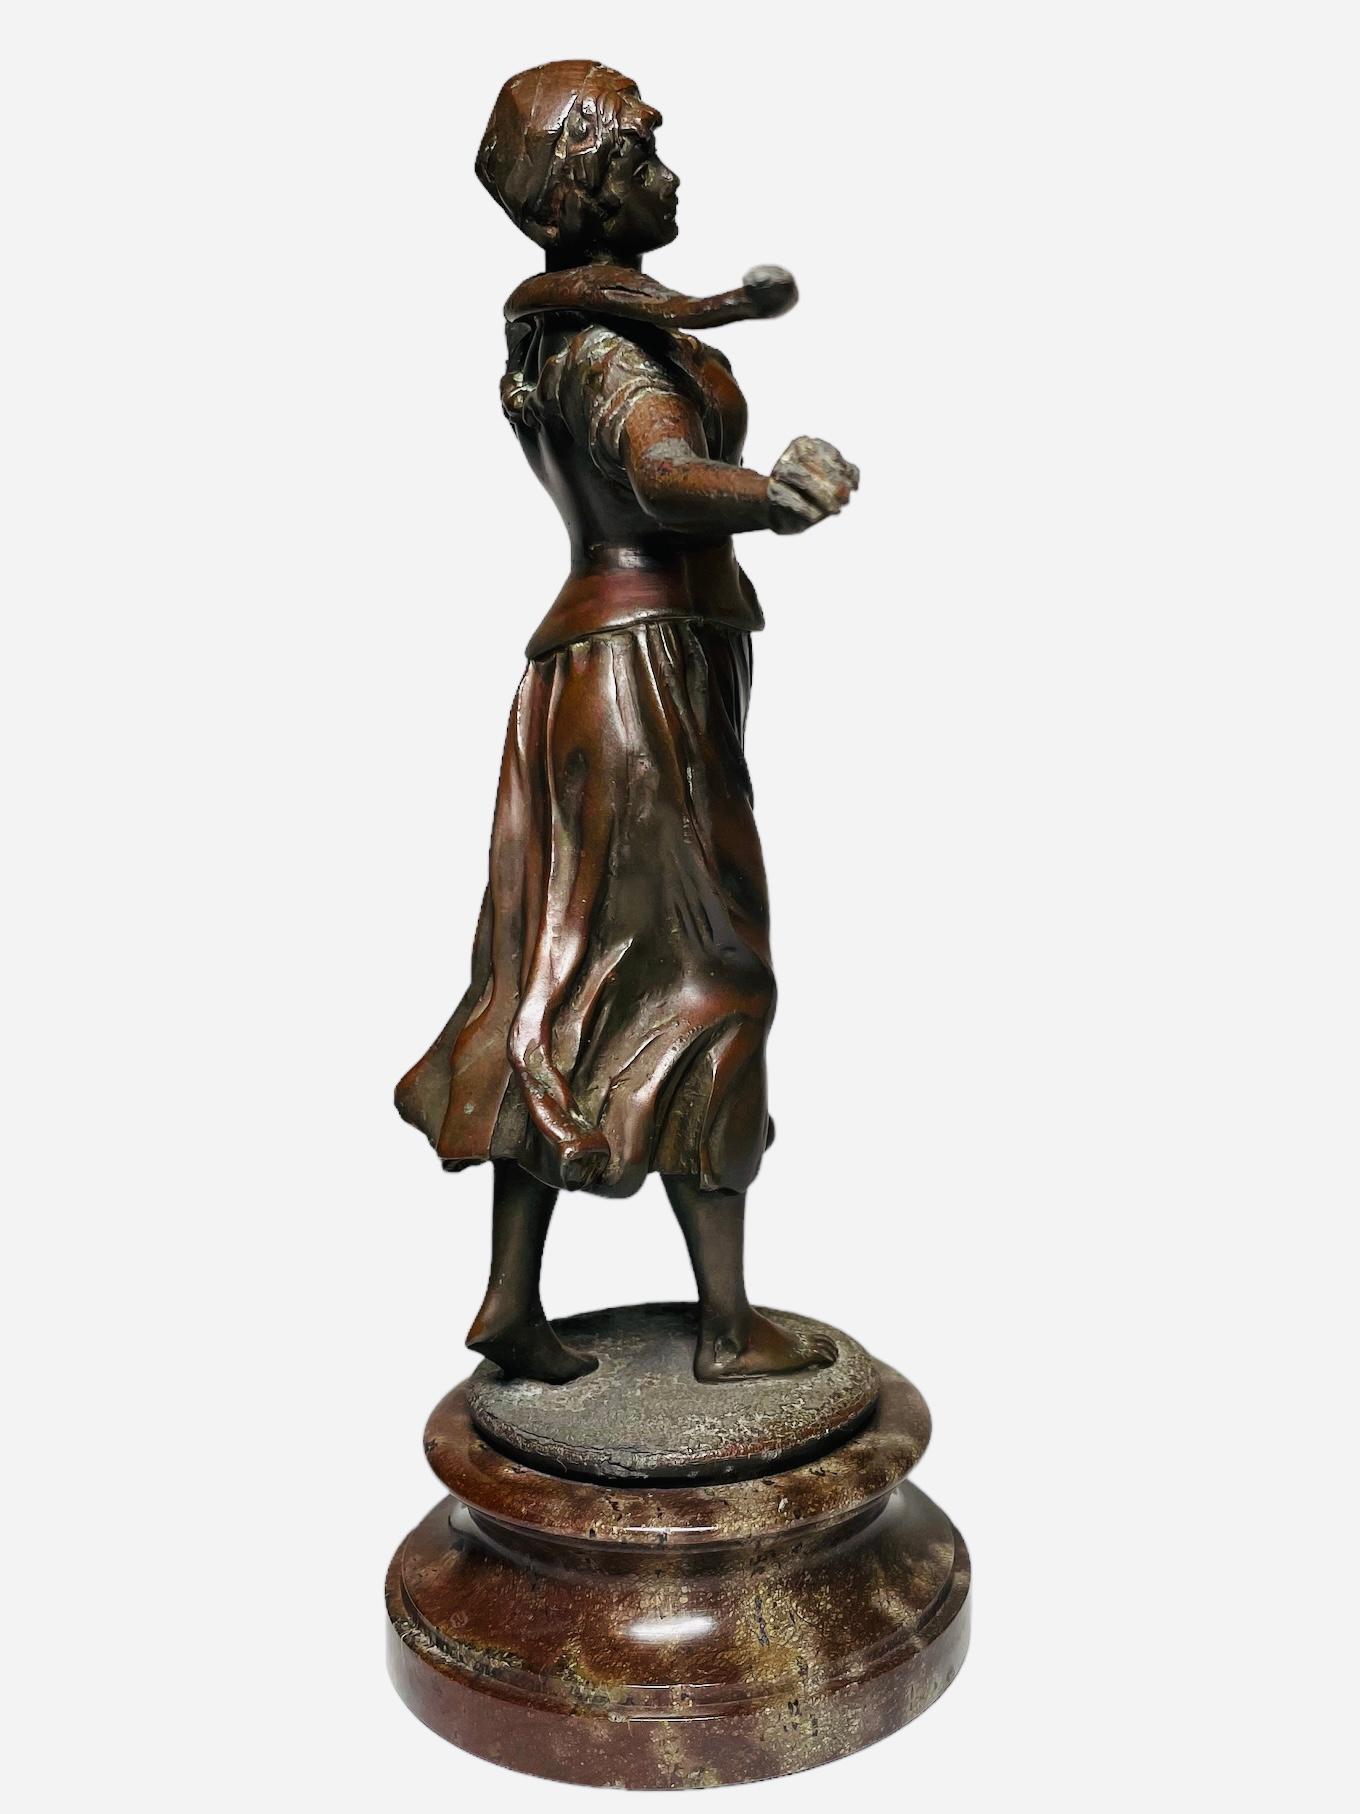 This is a bronze Sculpture of a Woman Water Bearer. It depicts a patinated bronze sculpture of a barefoot young woman peasant carrying a wood stick at the back of her neck. The sculpture is standing over a round wide marble base.